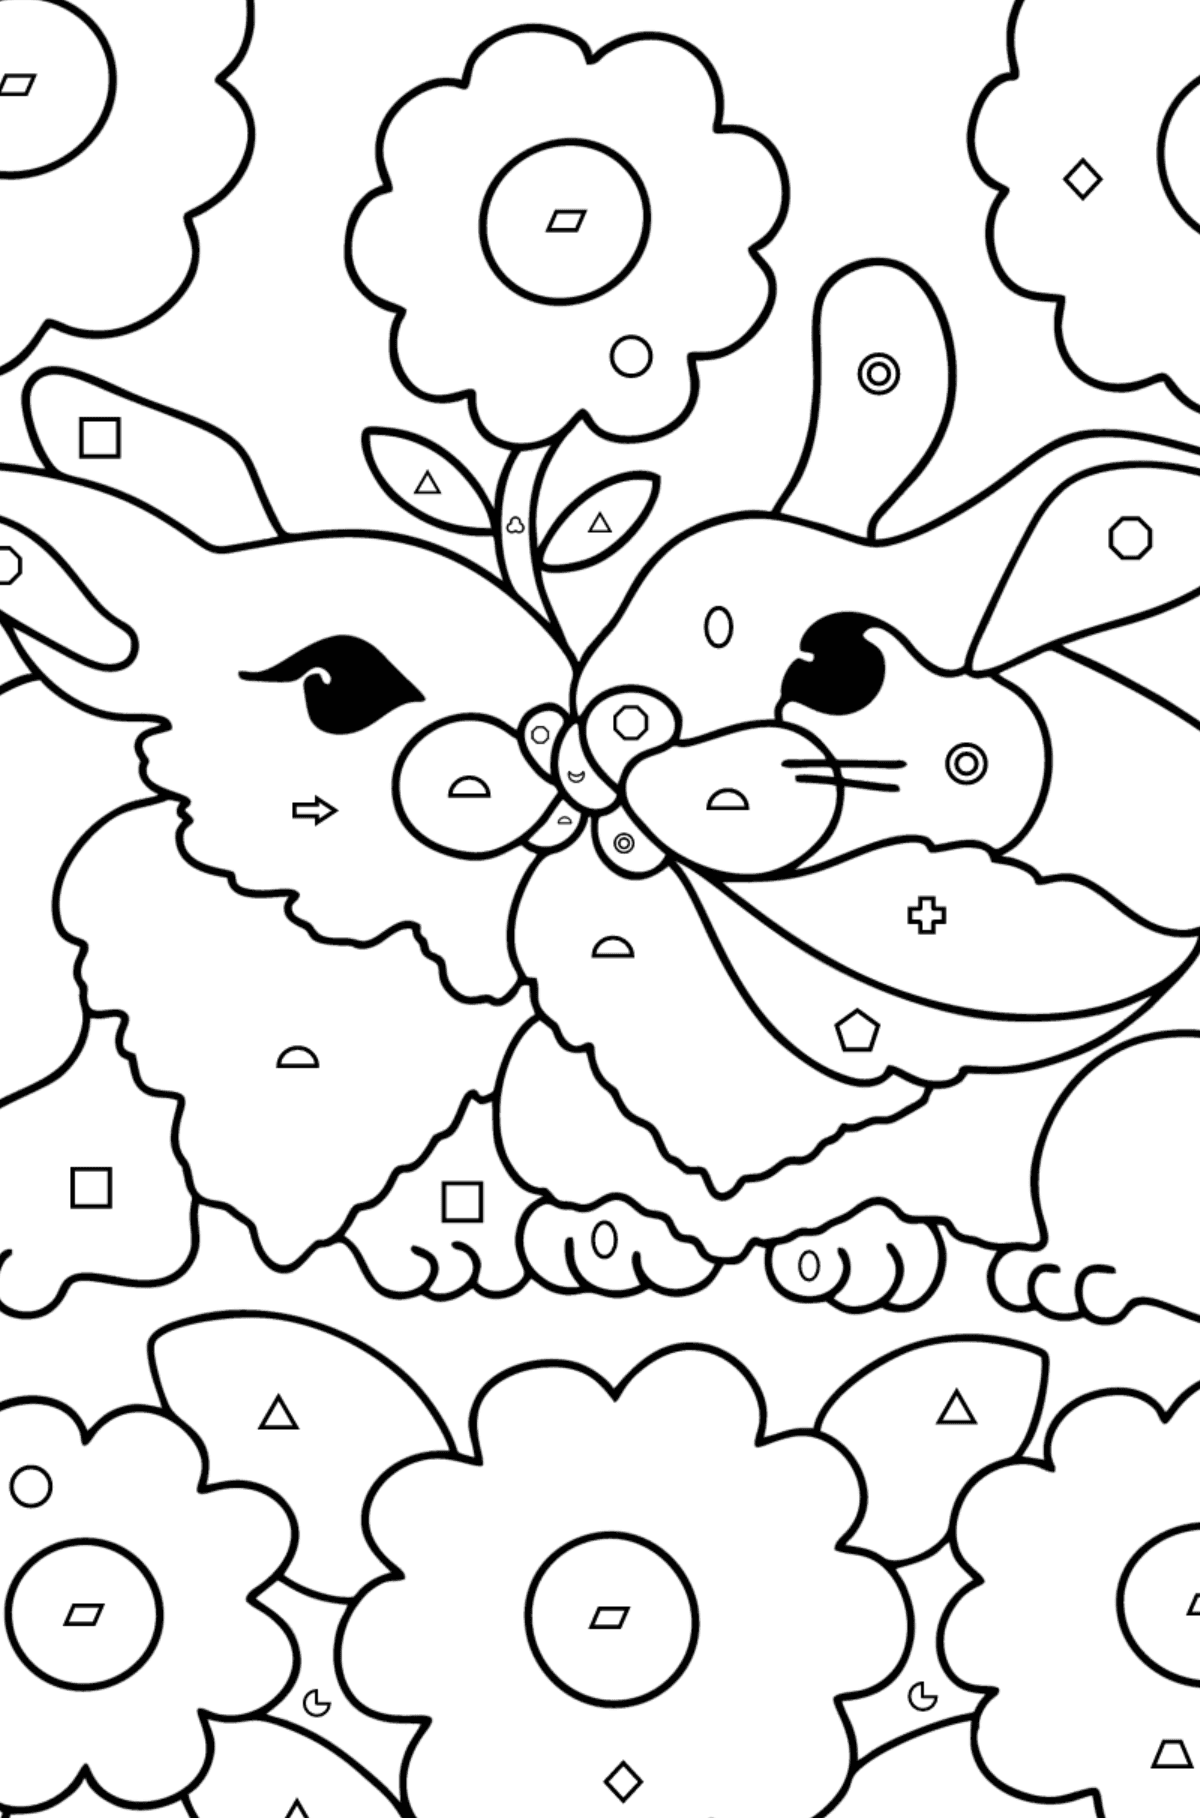 Cute Rabbits Coloring page - Coloring by Geometric Shapes for Kids